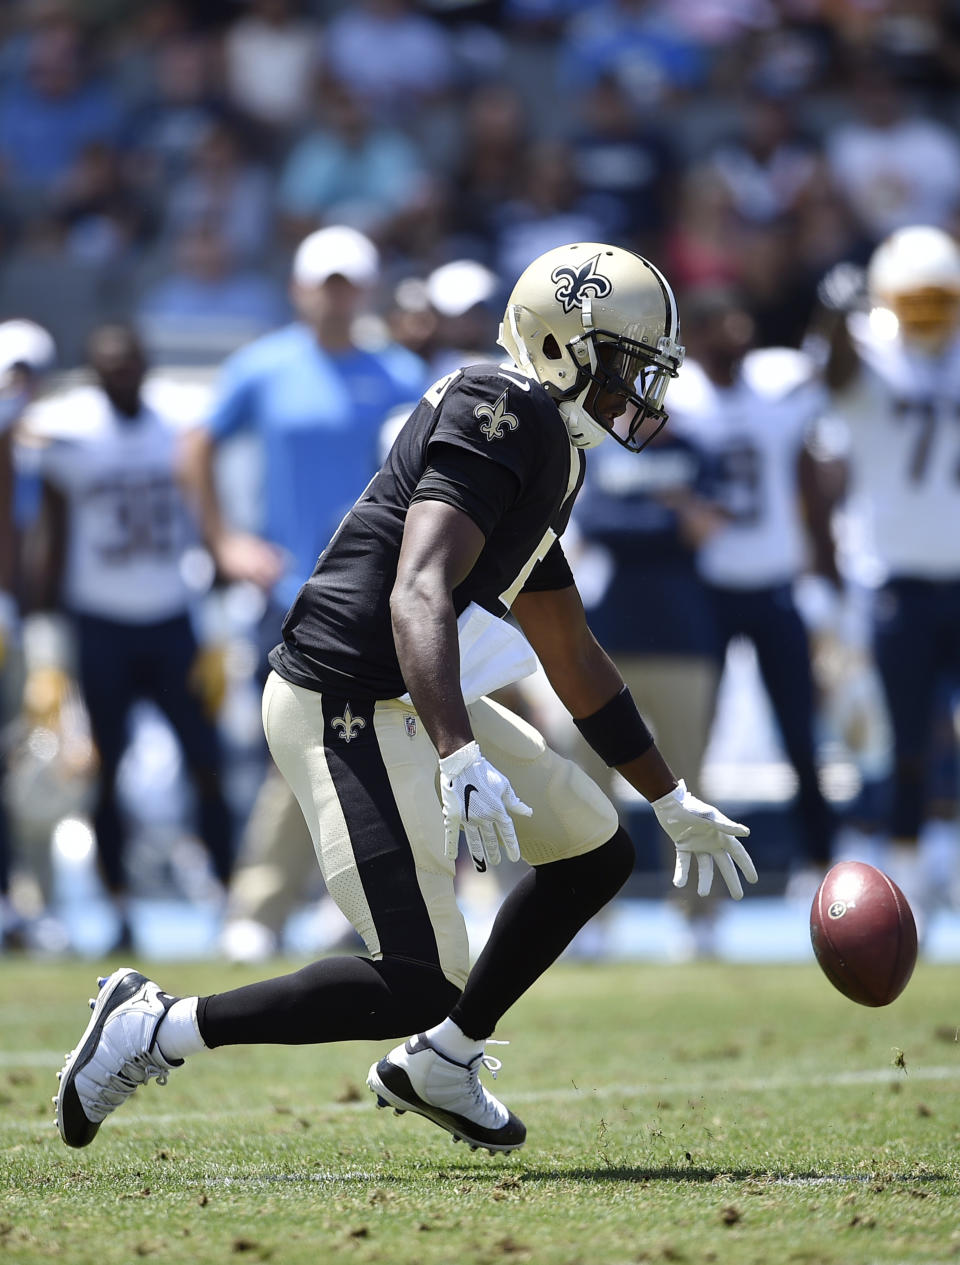 New Orleans Saints quarterback Teddy Bridgewater fumbles during the first half of a preseason NFL football game against the Los Angeles Chargers, Sunday, Aug. 18, 2019, in Carson, Calif. (AP Photo/Kelvin Kuo )